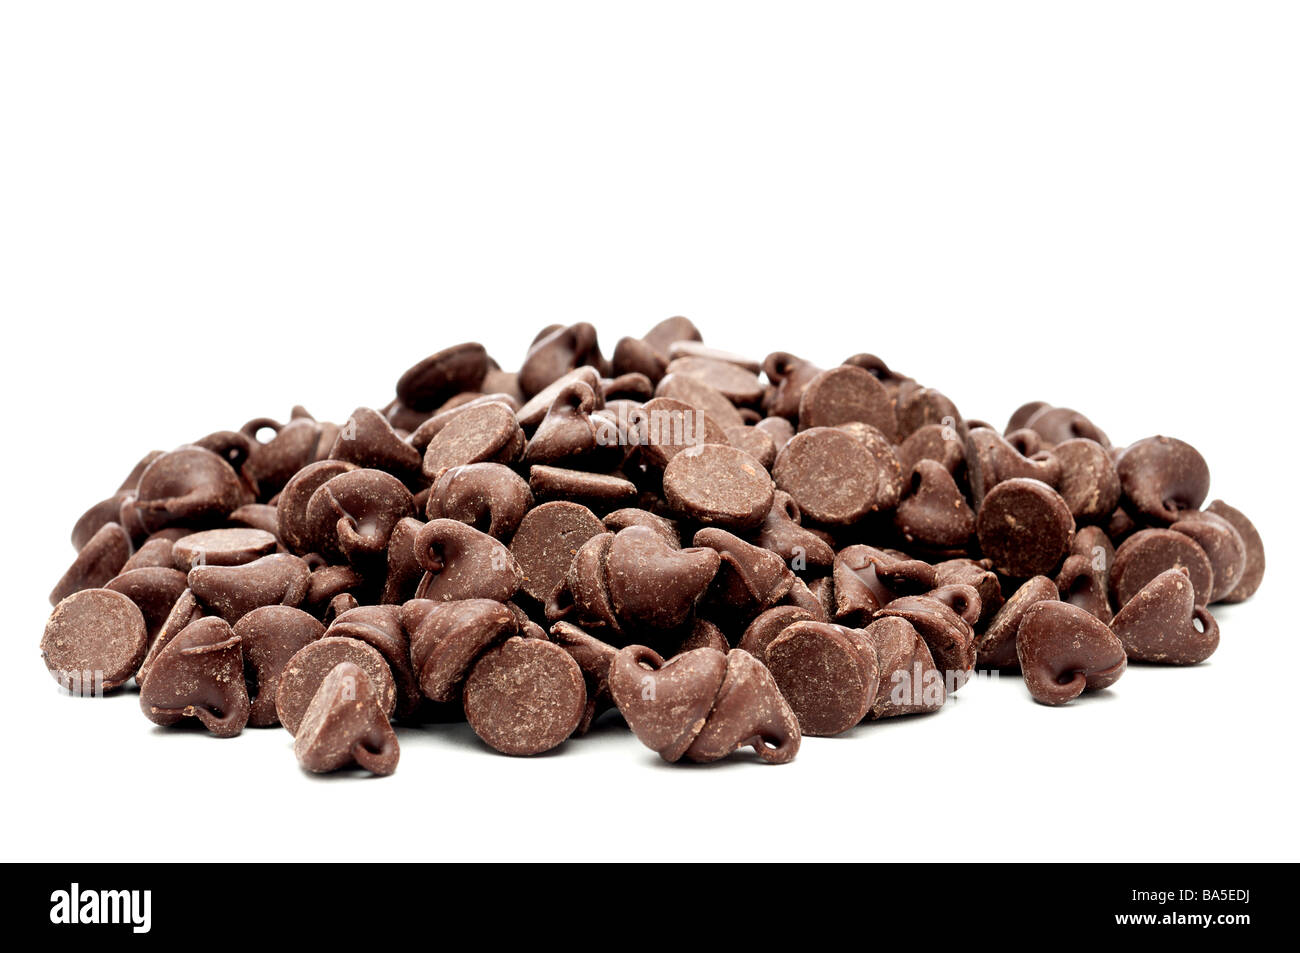 A horizontal images of a pile of chocolate chips Stock Photo